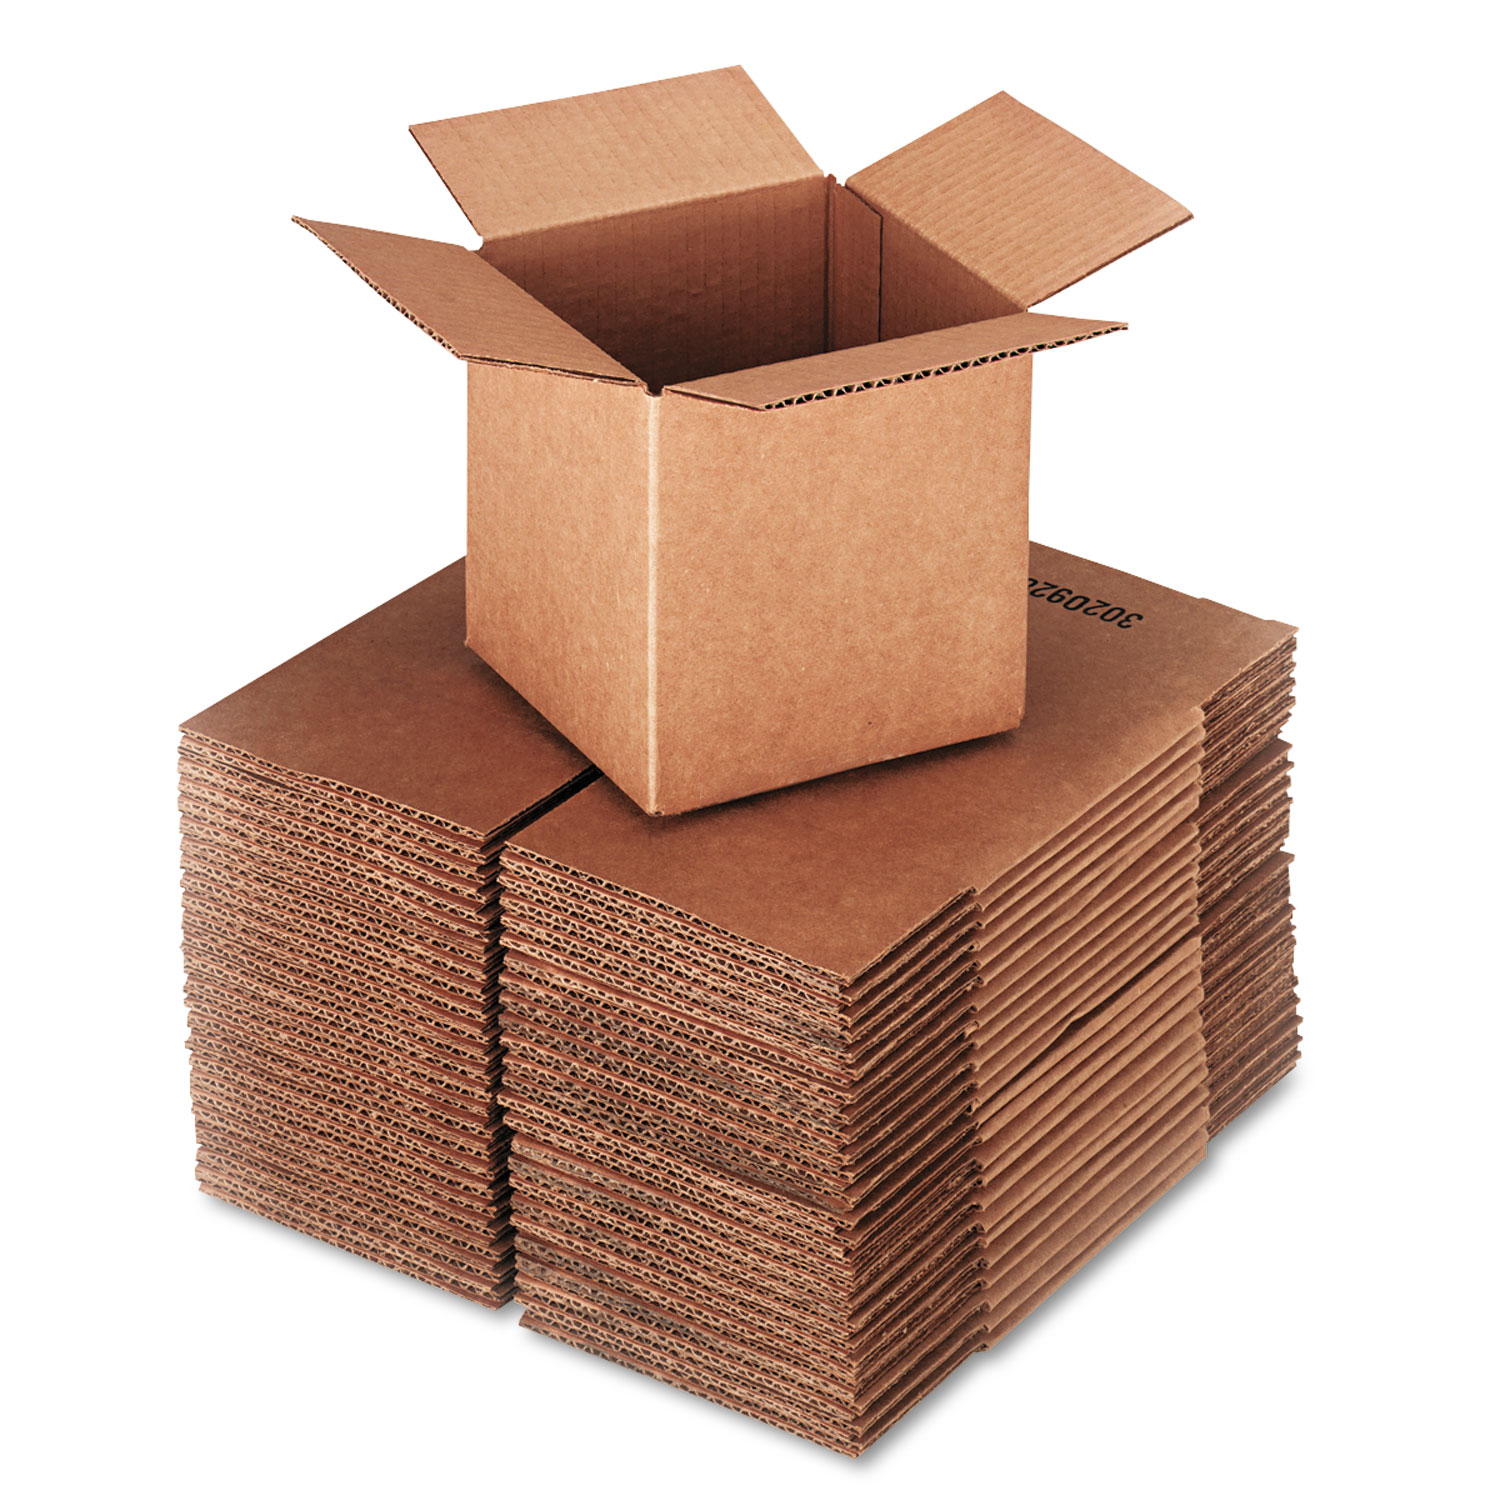 Cubed Fixed-Depth Shipping Boxes, Regular Slotted Container (RSC), 6" x 6" x 6", Brown Kraft, 25/Bundle